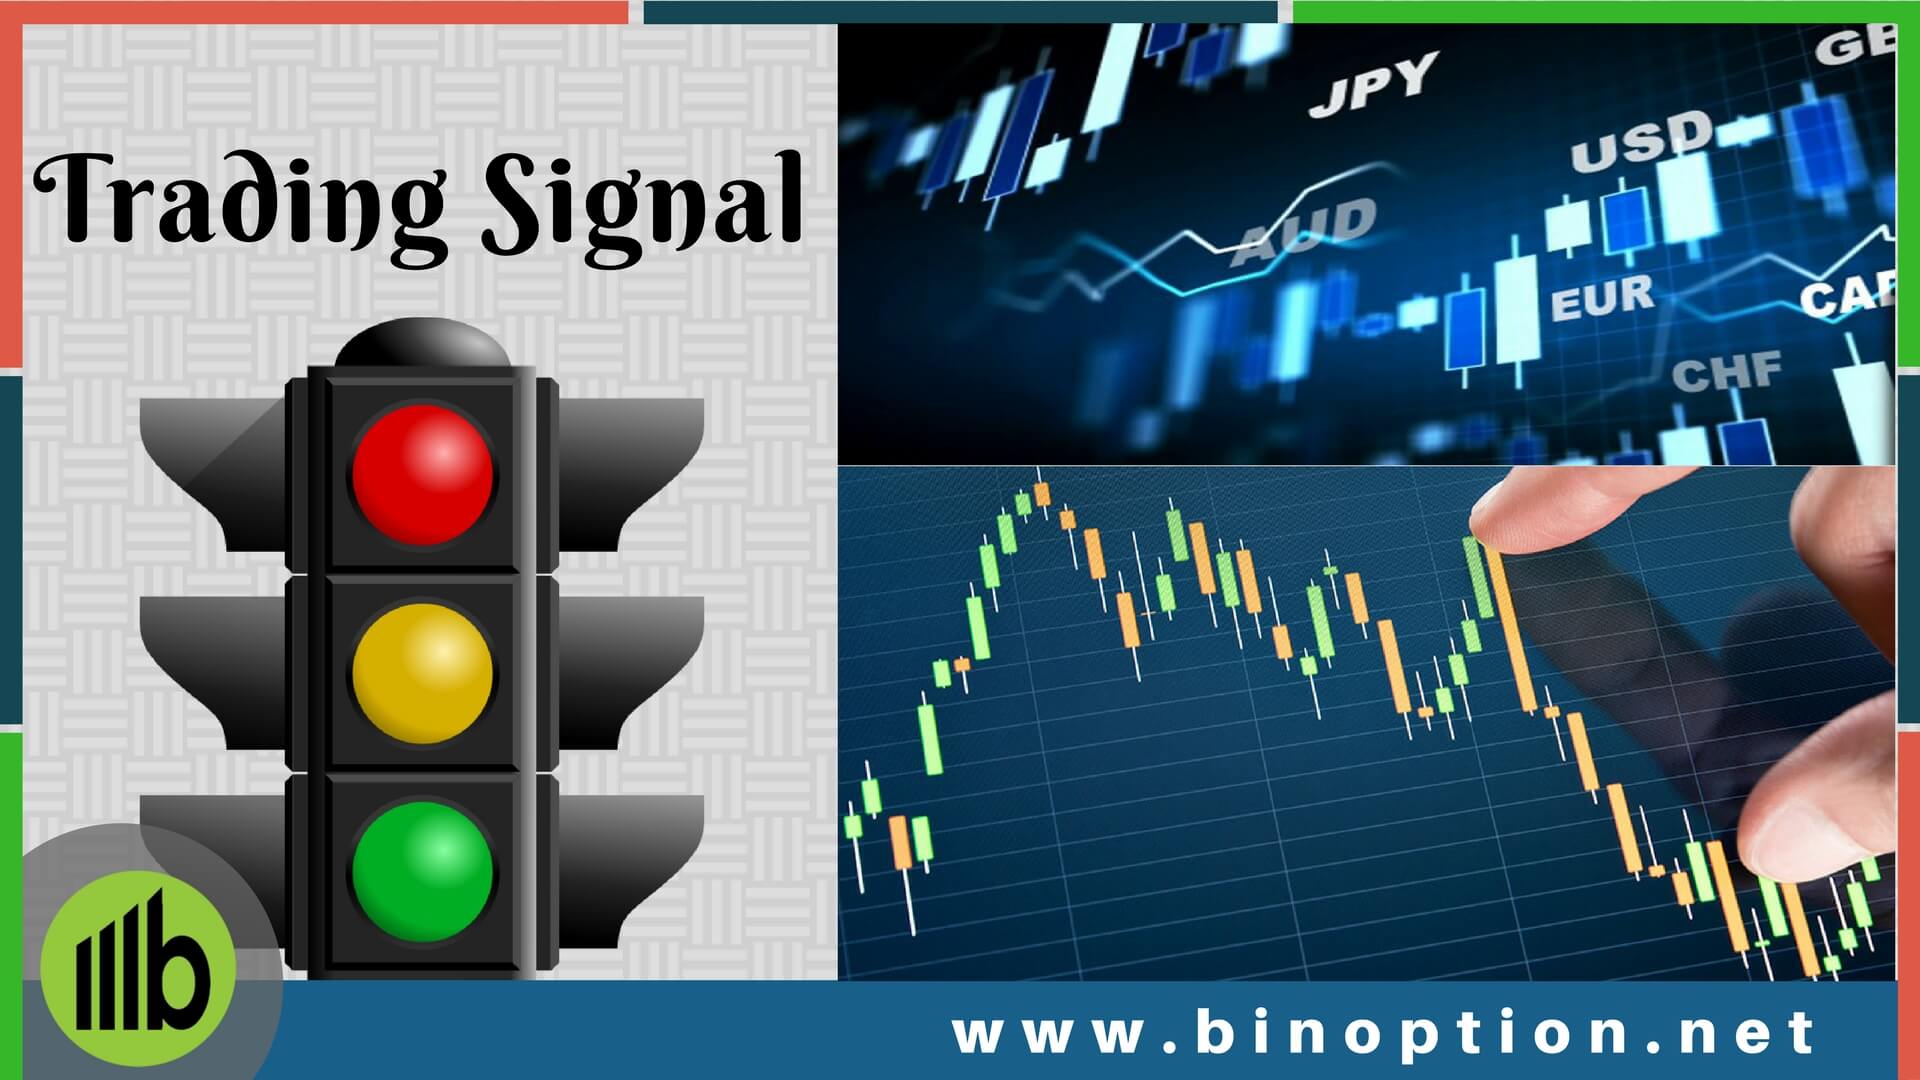 Binary options trading signals that work